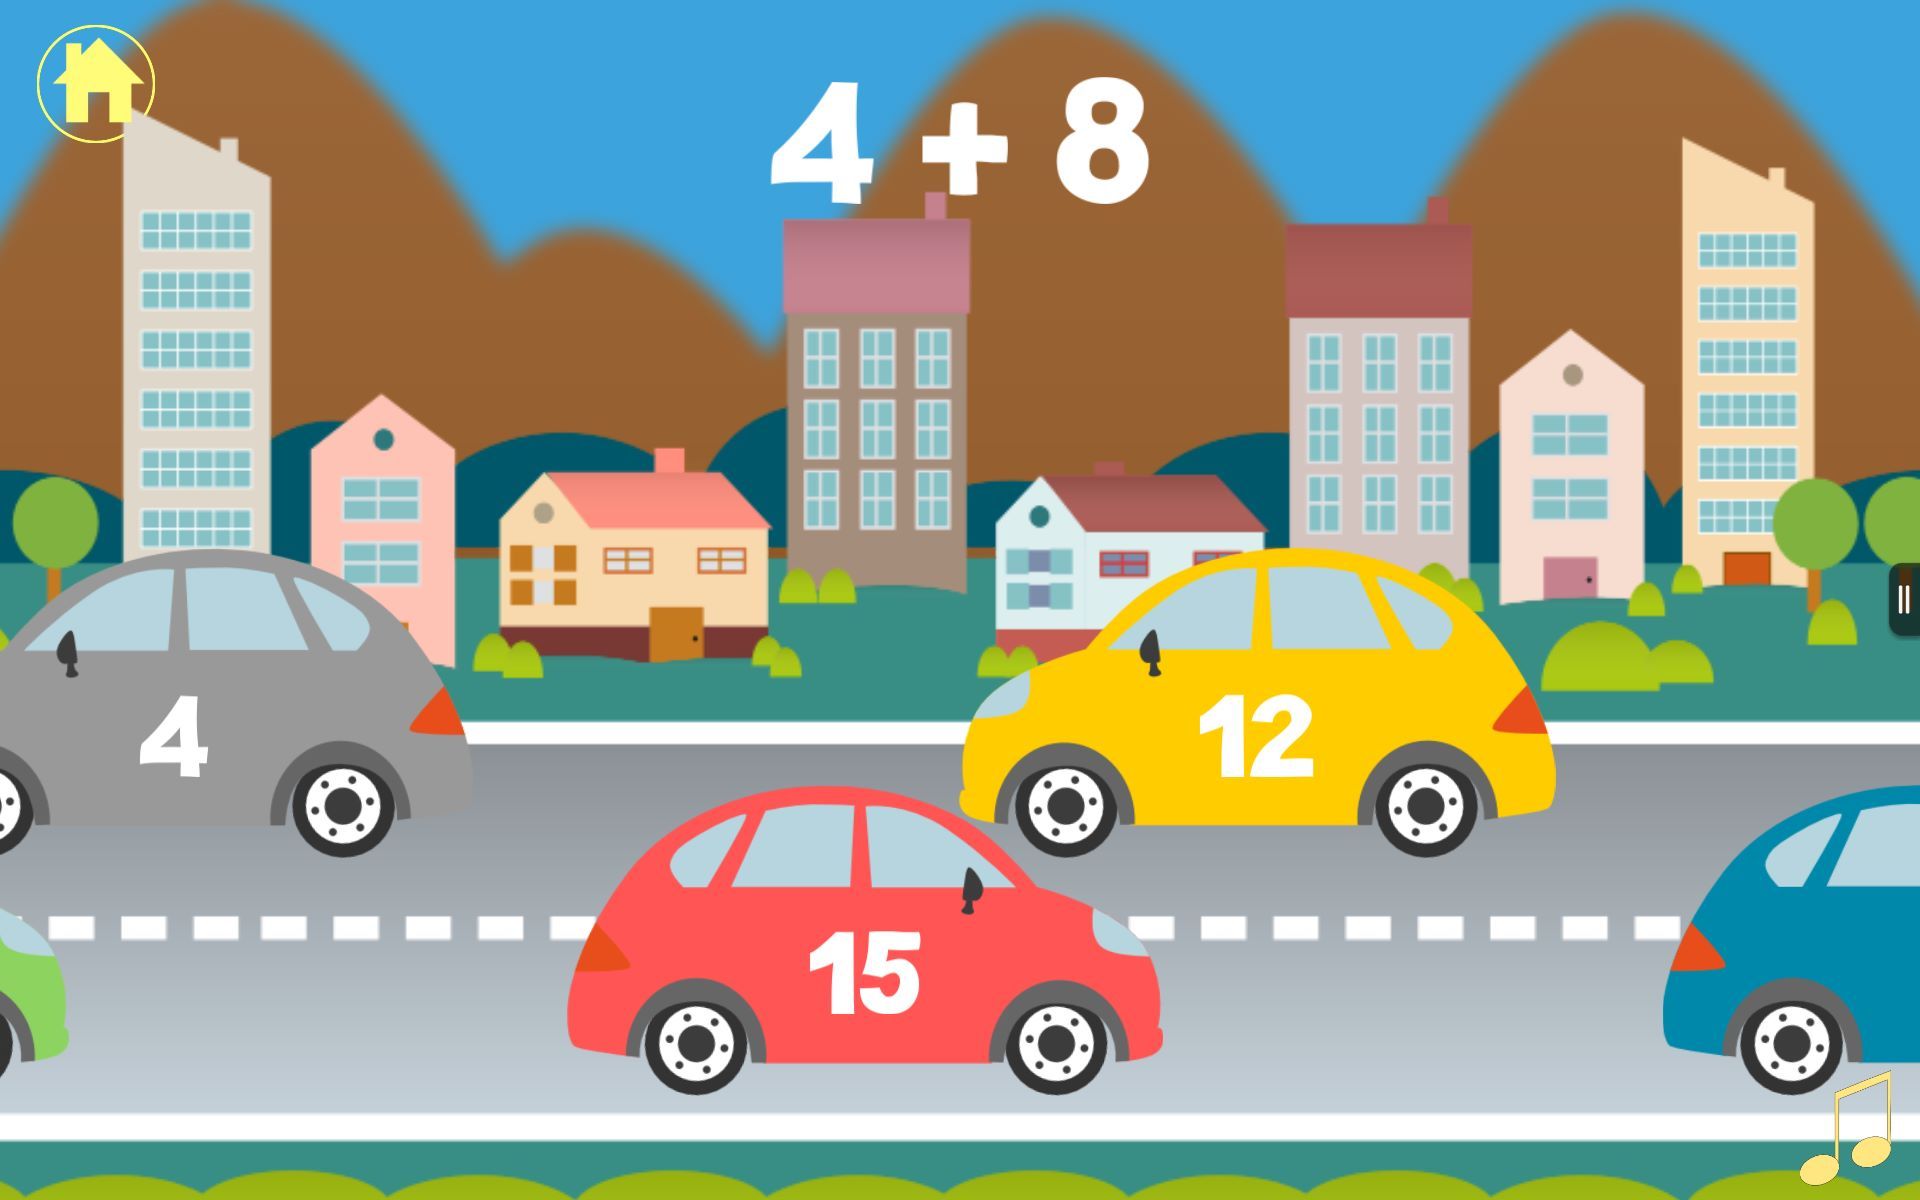 Math Quiz Free: Kindergarten, First, Second, and Third Grade Arithmetic Practice Game